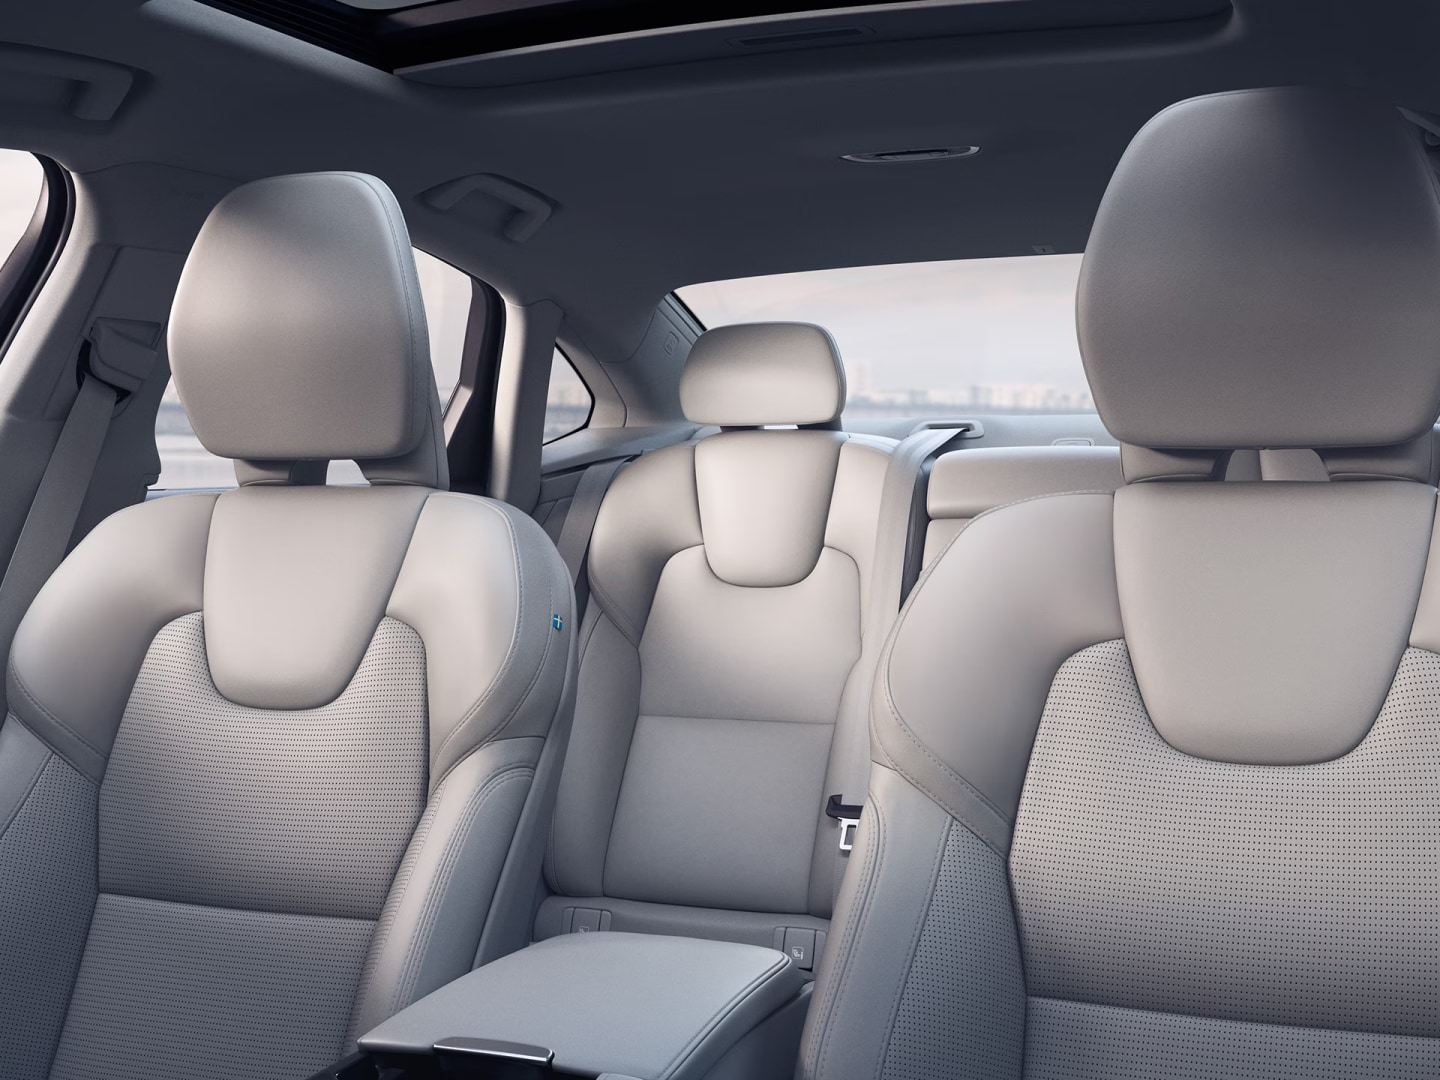 Front and rear seats in the Volvo S90.